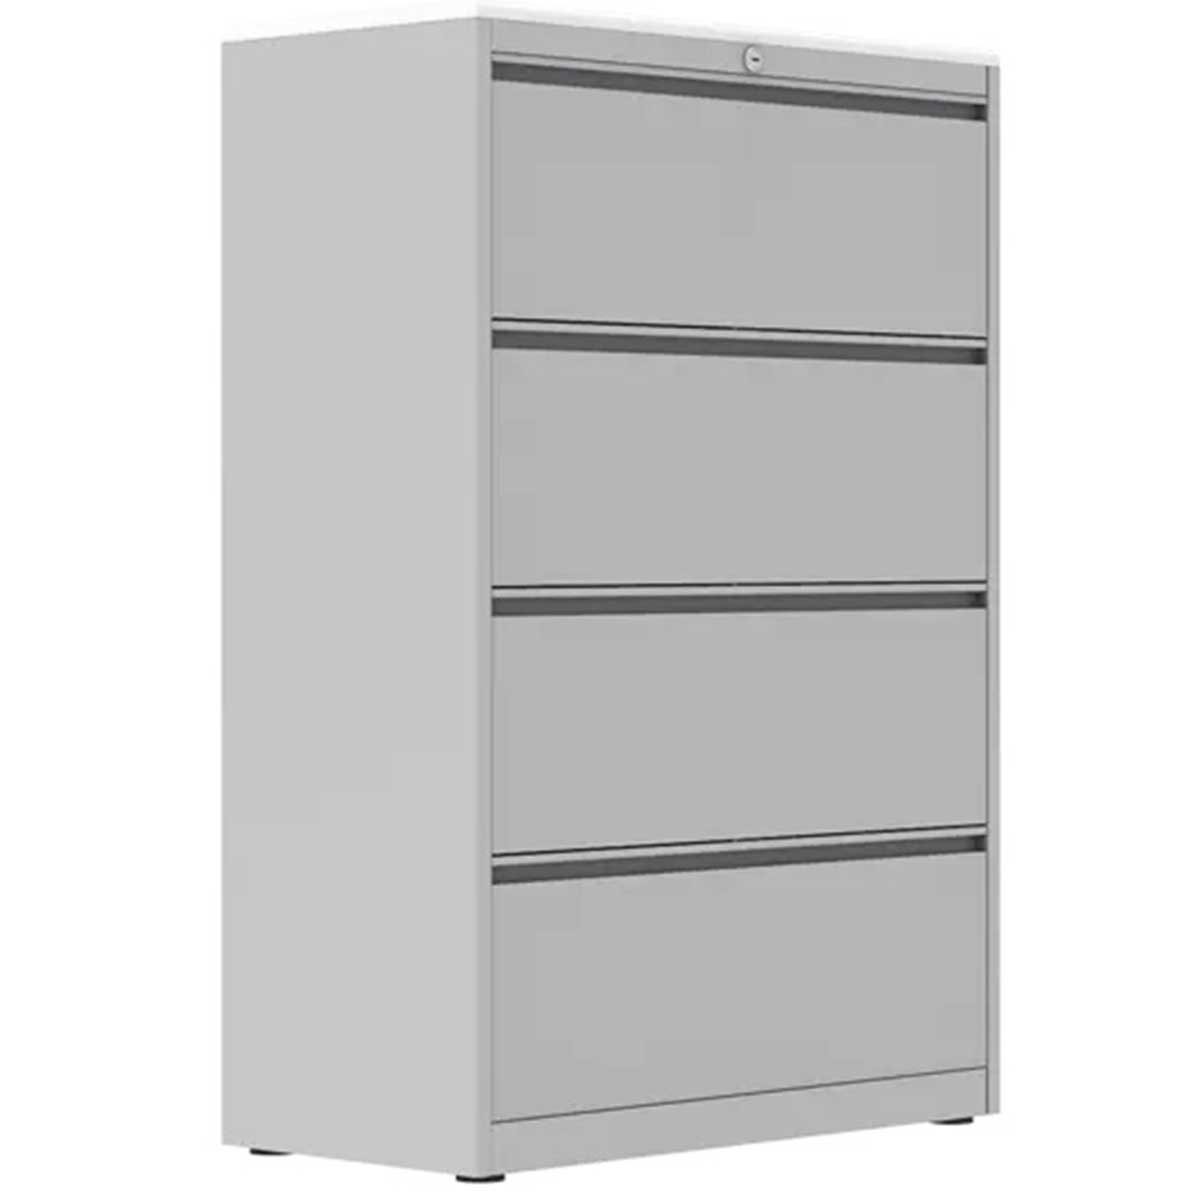 Fire Resistant File Cabinet Manufacturers, Suppliers in Mohan Nagar